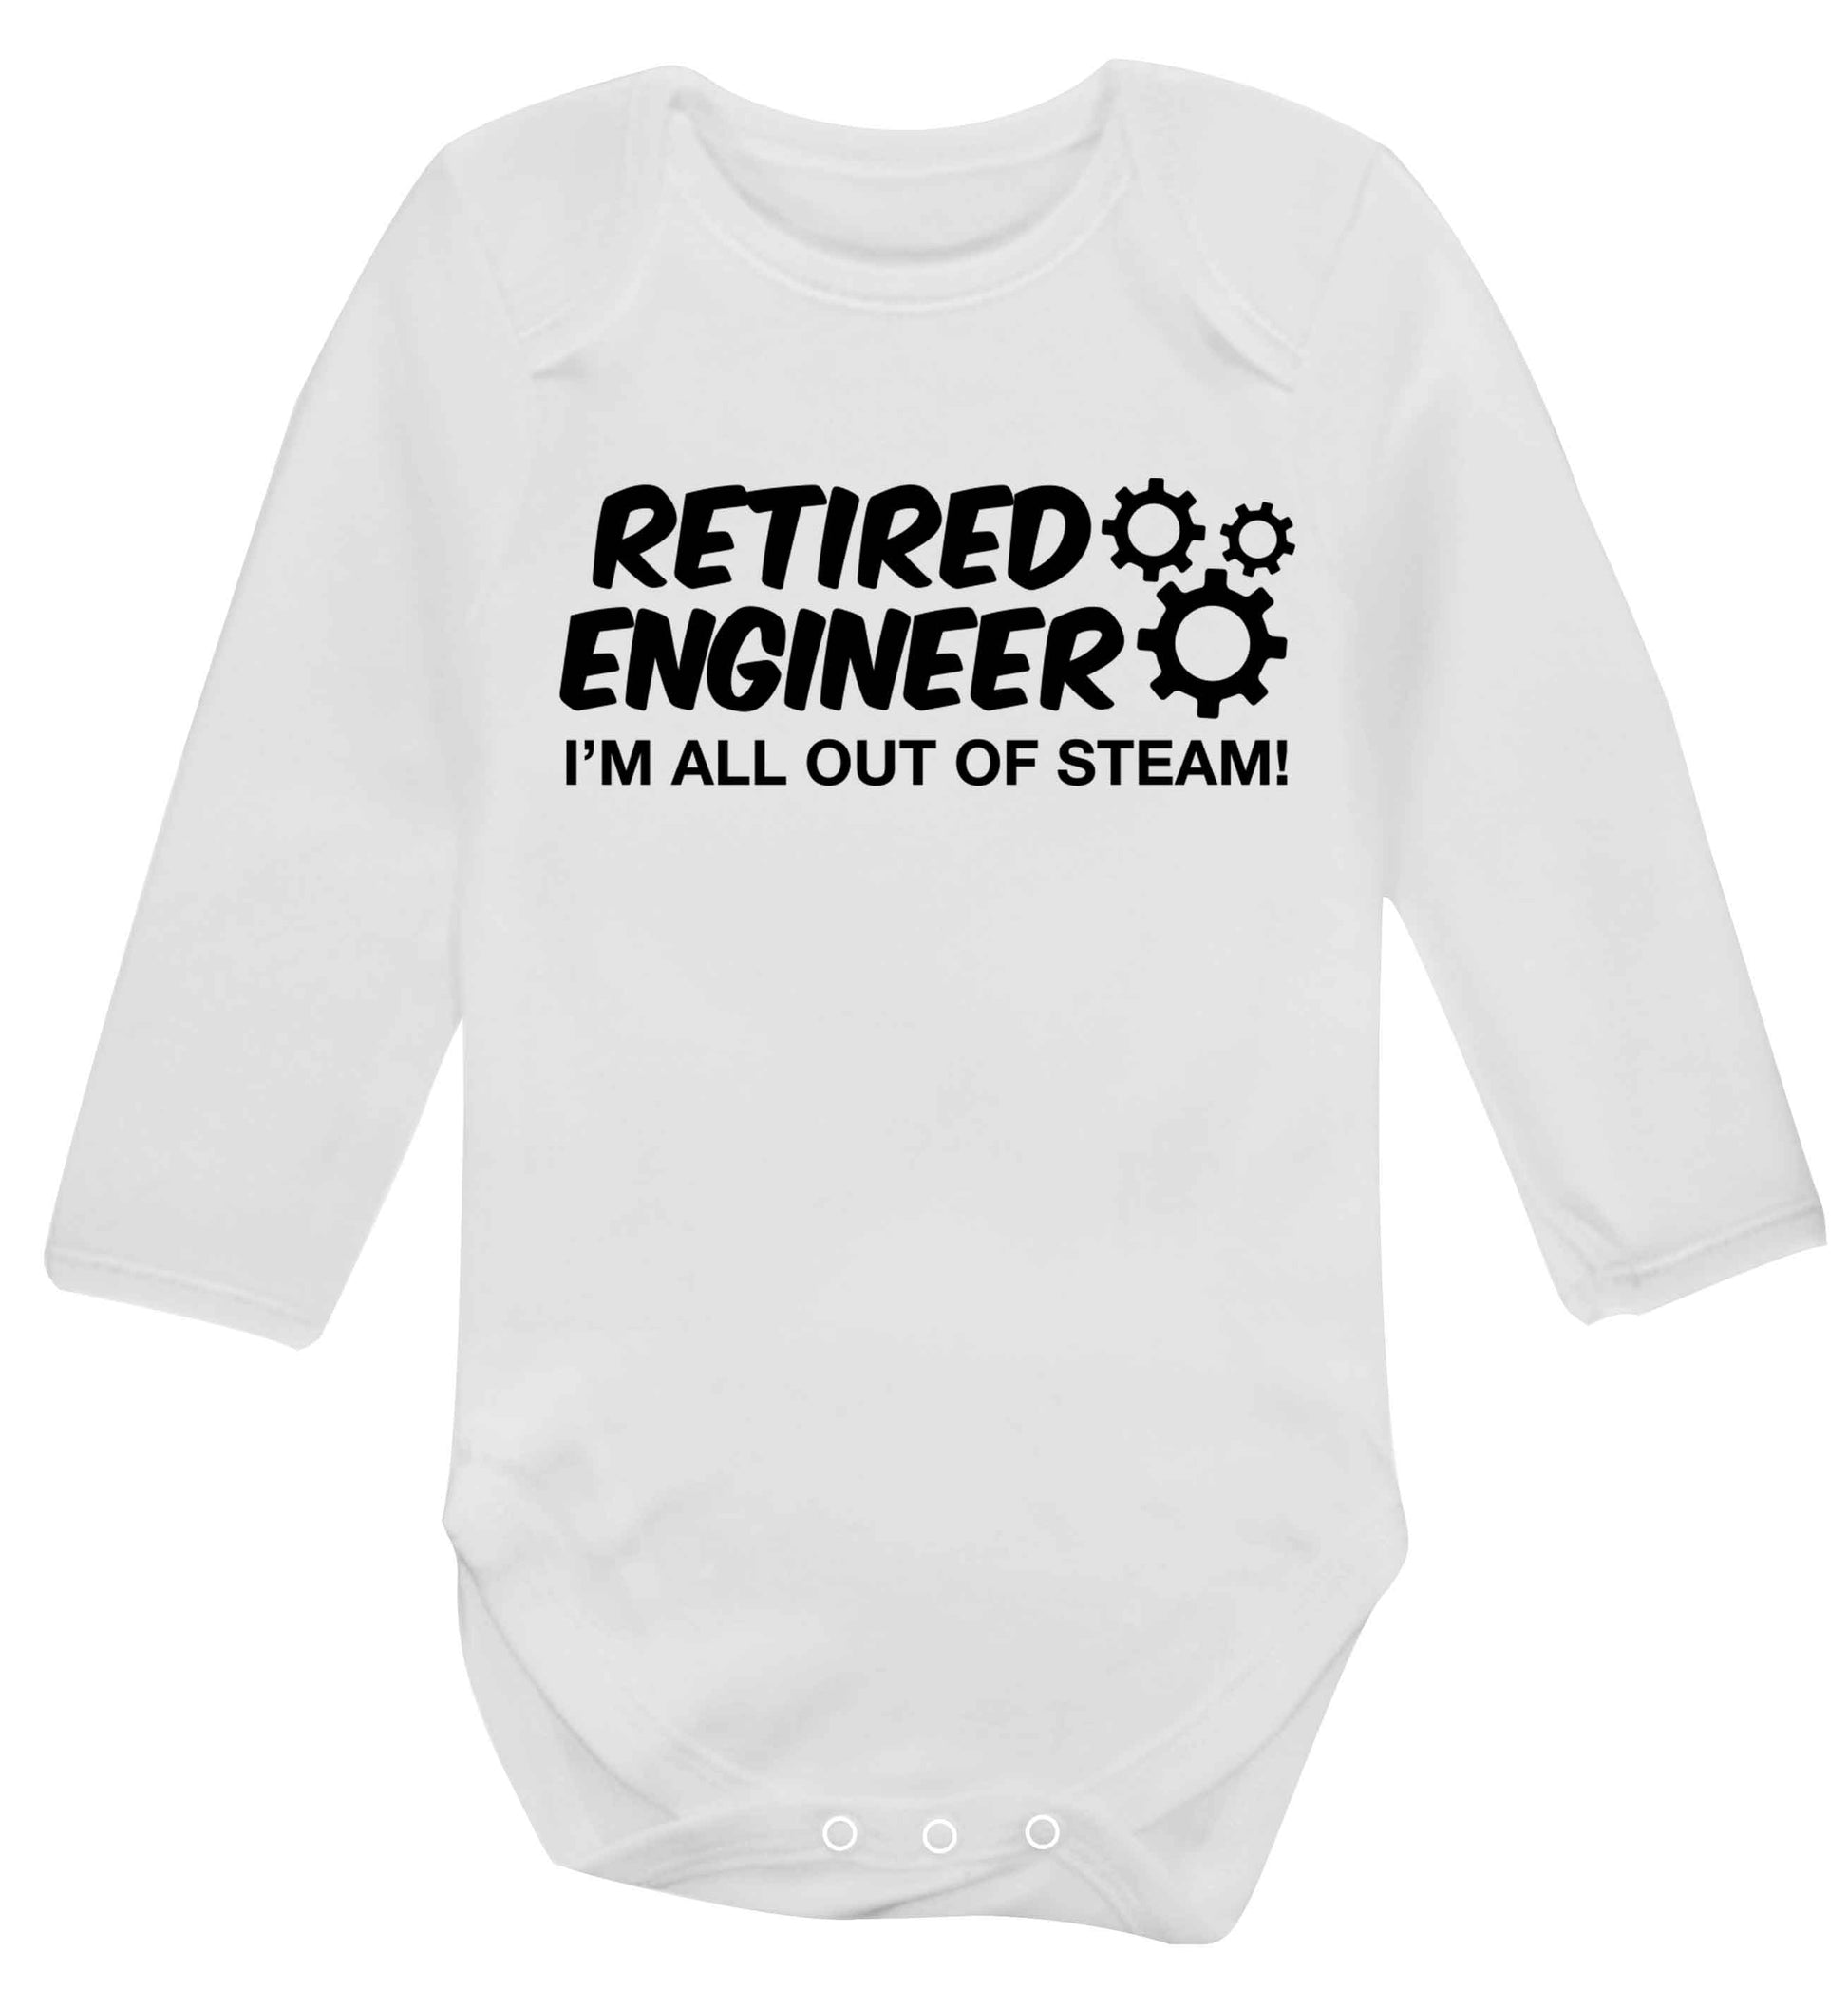 Retired engineer I'm all out of steam Baby Vest long sleeved white 6-12 months